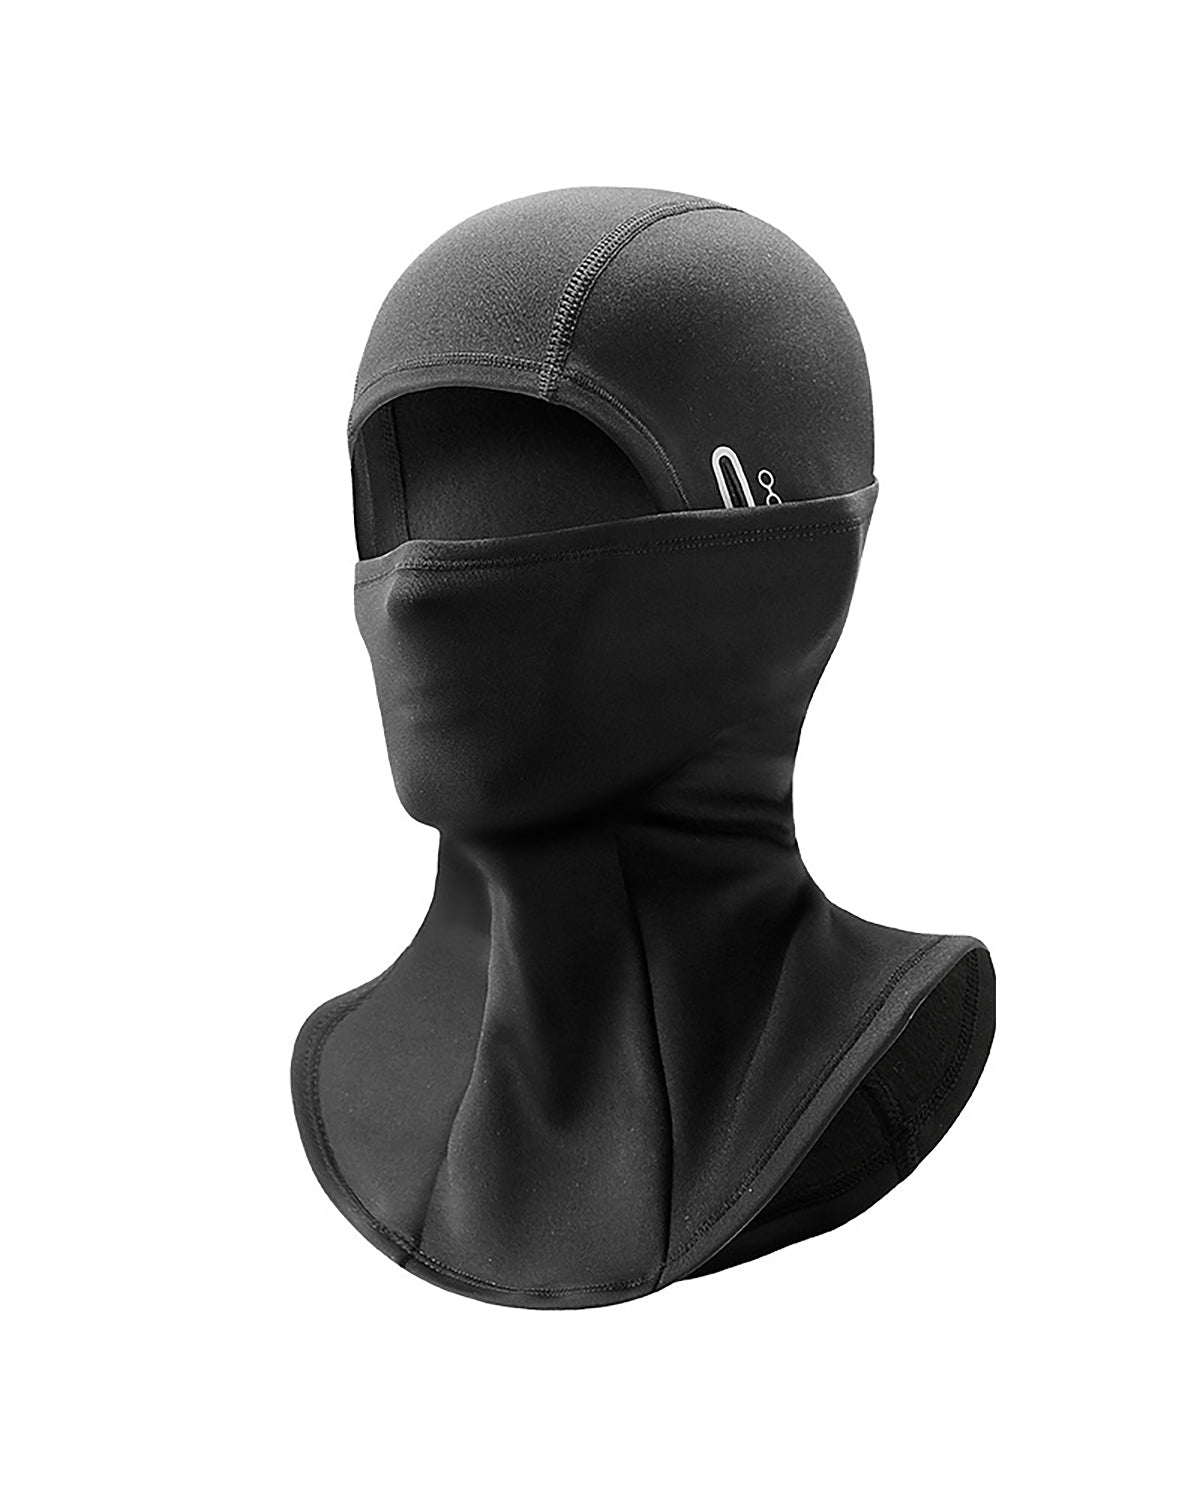 Ski Mask Winter Face Mask Cover Thermal Fleece Hood For Cycling